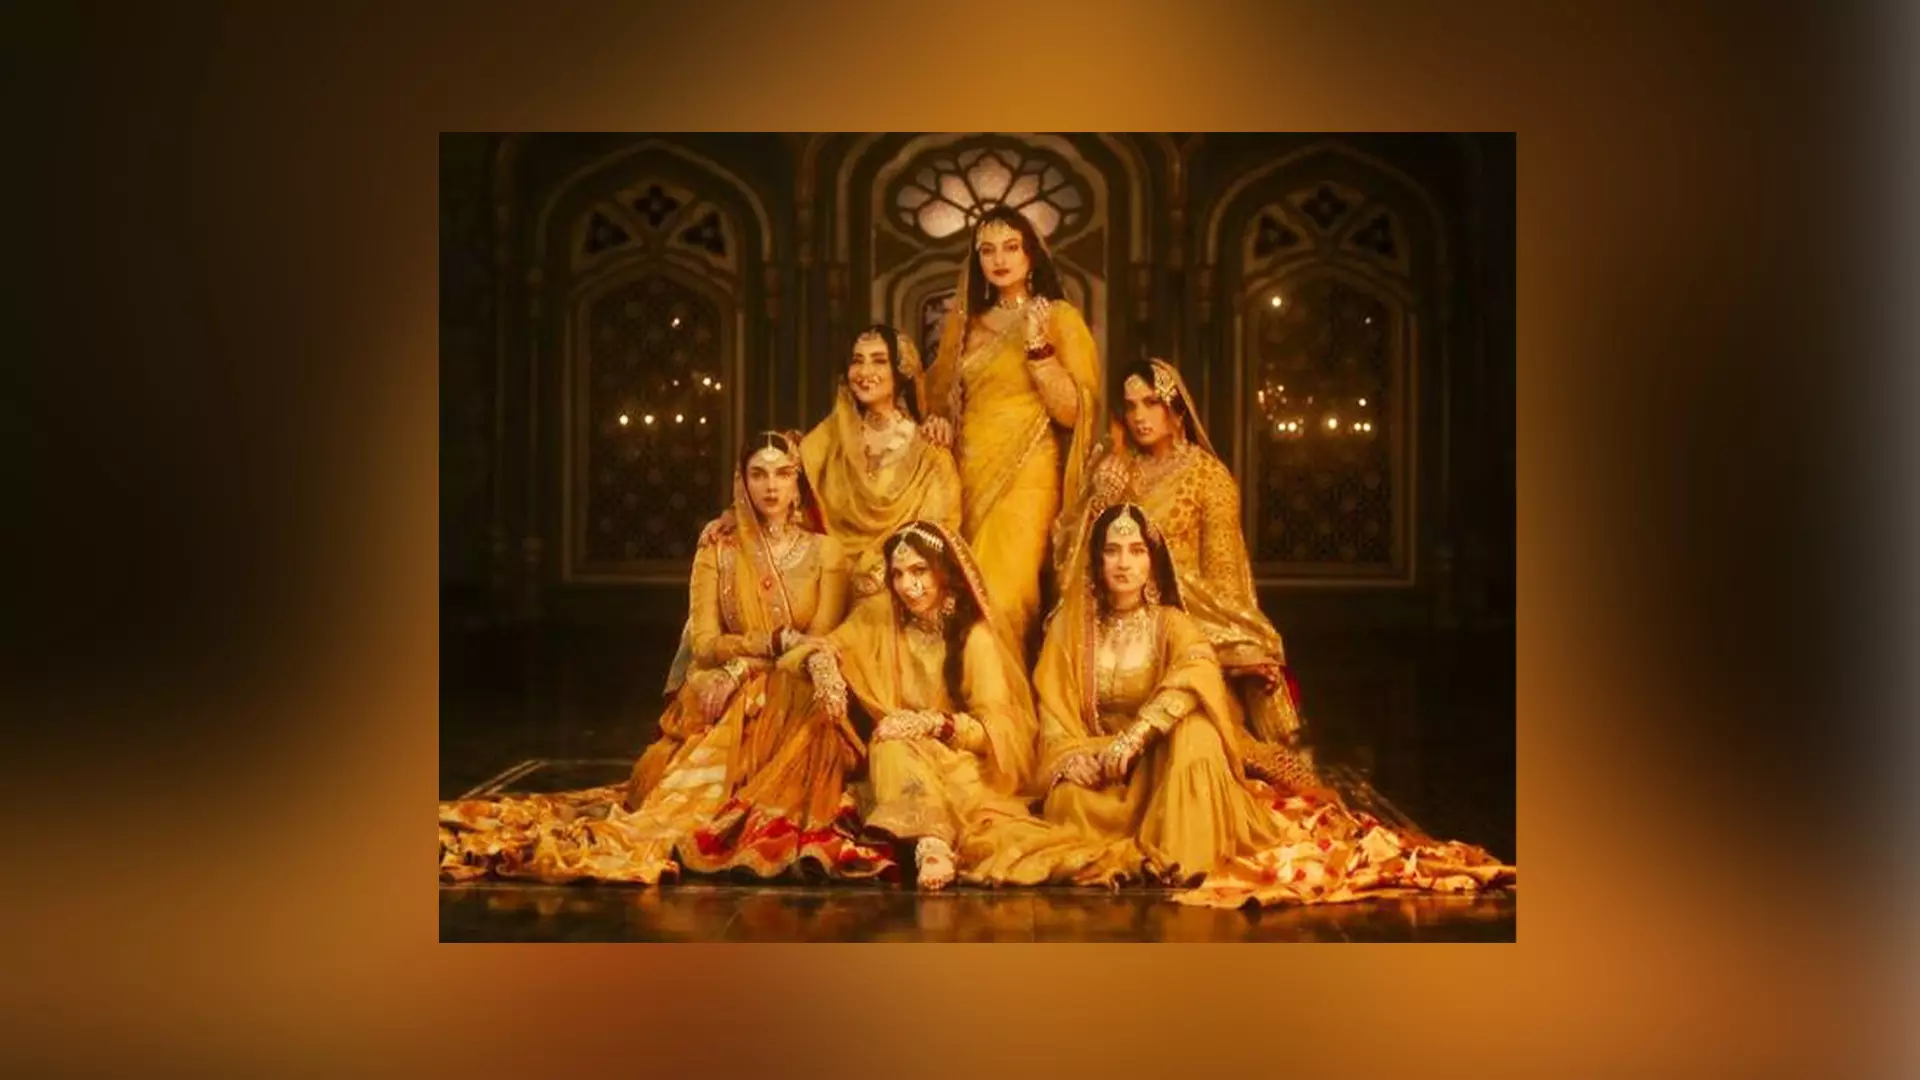 In Heeramandi: The Diamond Bazaar, made with Bhansali’s majestic signature flair and penchant for opulence, we are going to meet the courtesans of Lahore in pre-independence India.